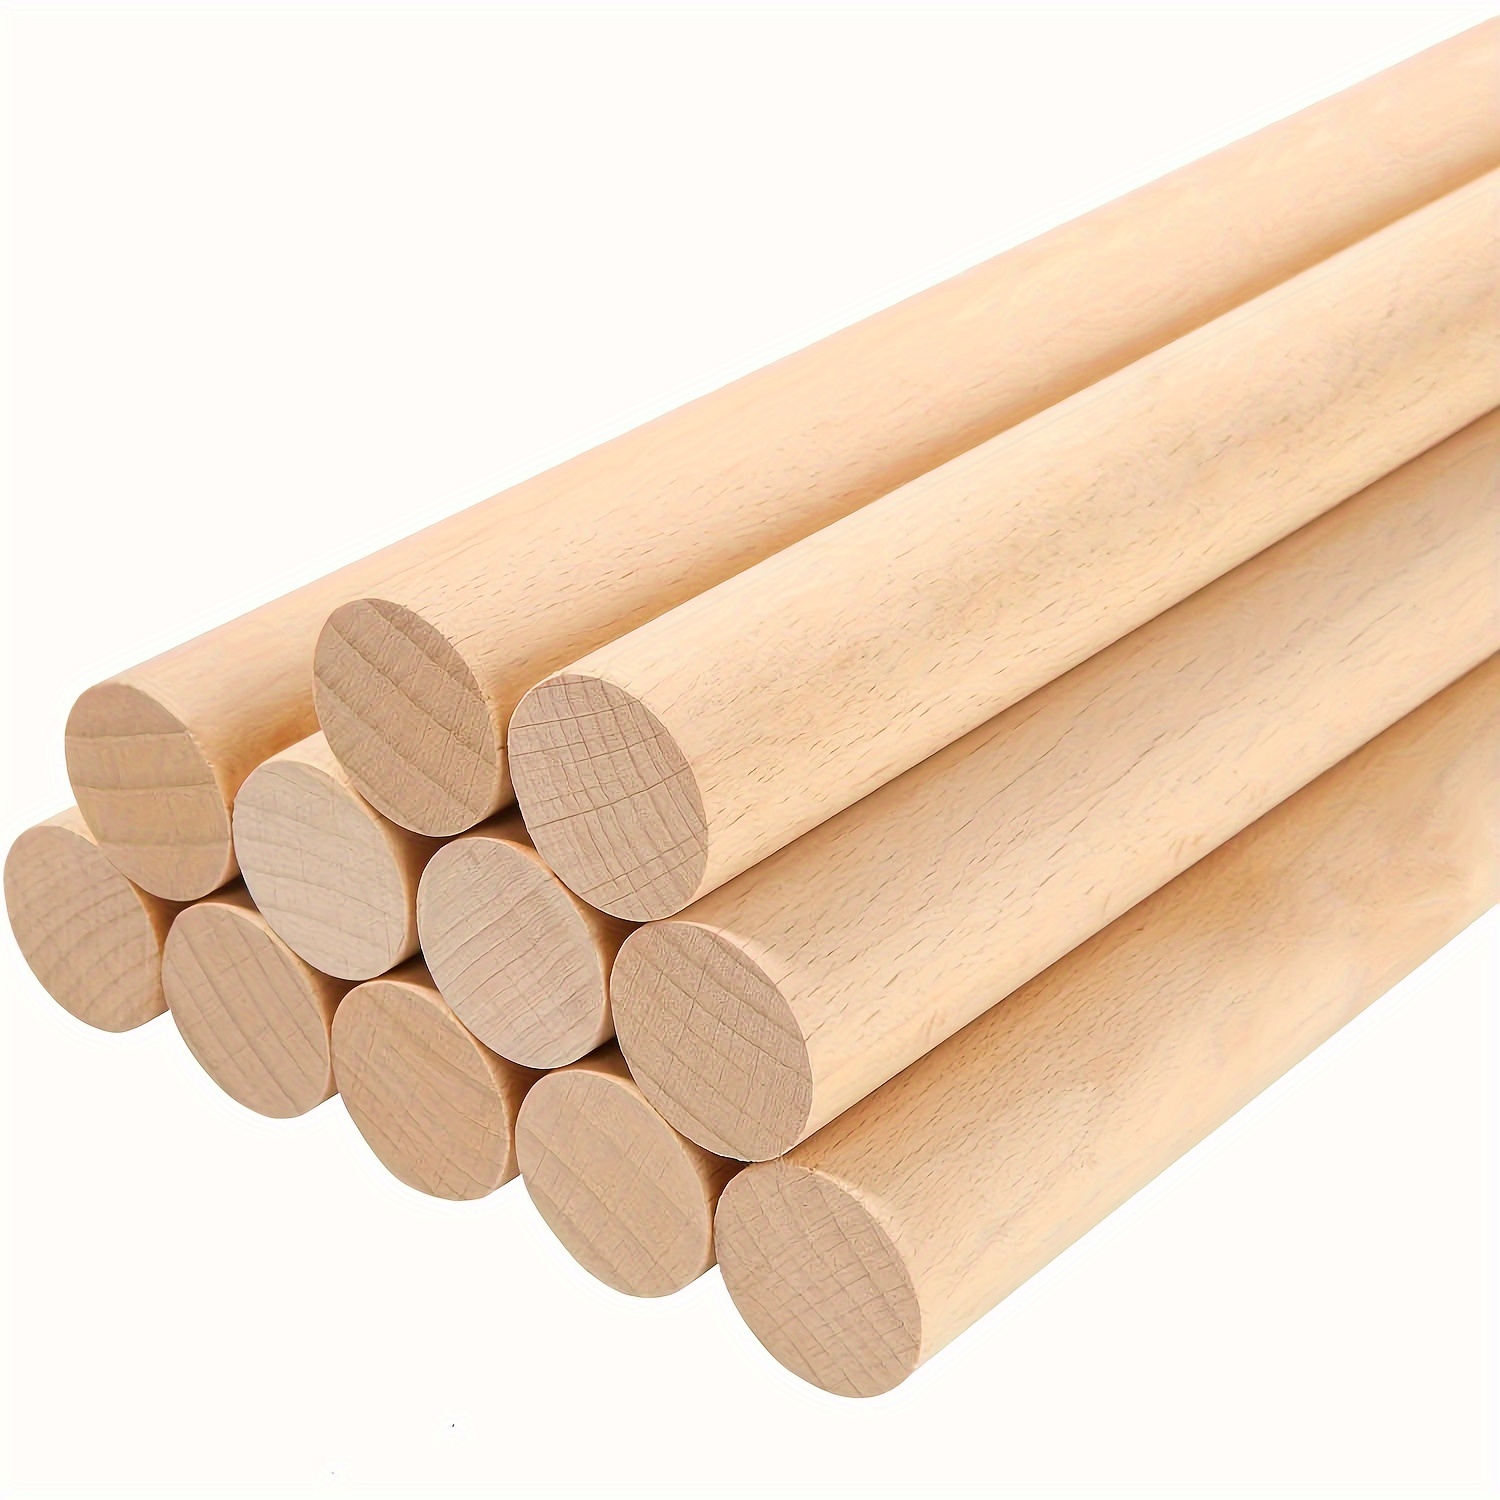 100 PCS Wooden Dowel Rods 6 inch Wood Dowels Assorted Sizes Wood Craft  Sticks 1/8 3/16 1/4 5/16 3/8 x 6 Inch Bamboo Wood Sticks Long Wooden Sticks  for